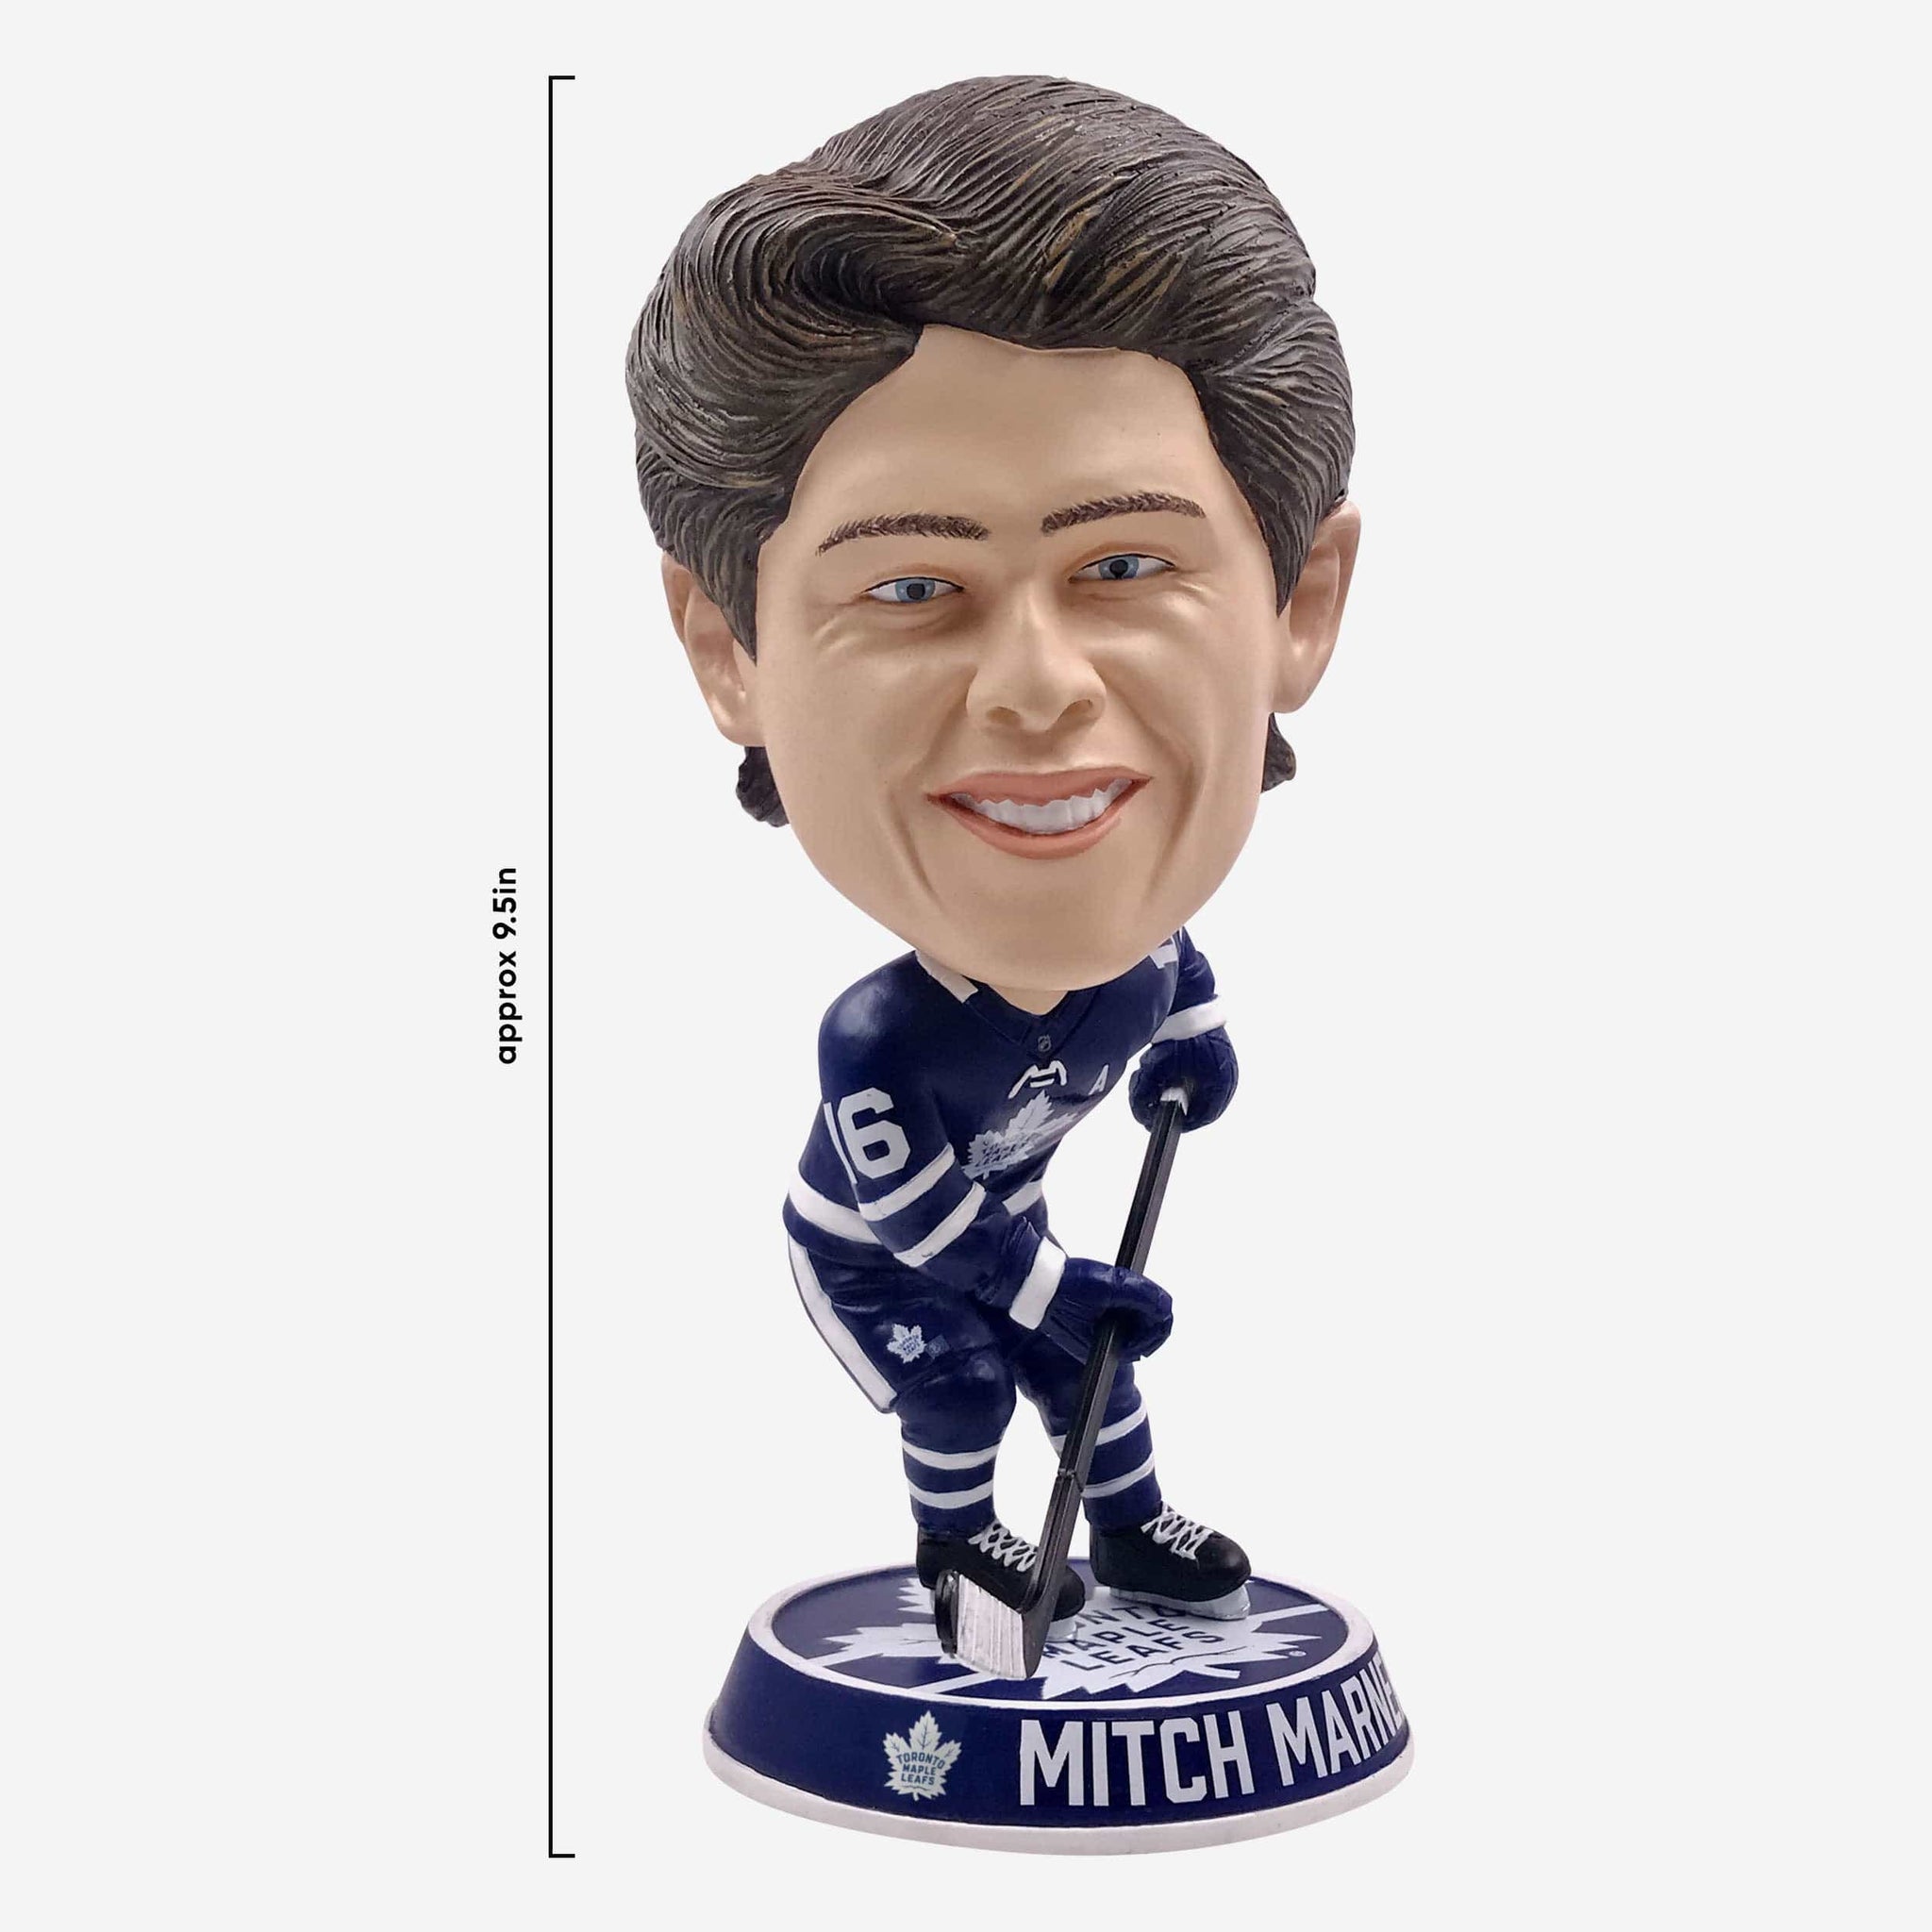 NHL All-Star Game Maple Leafs Mitch Marner Bobblehead Released